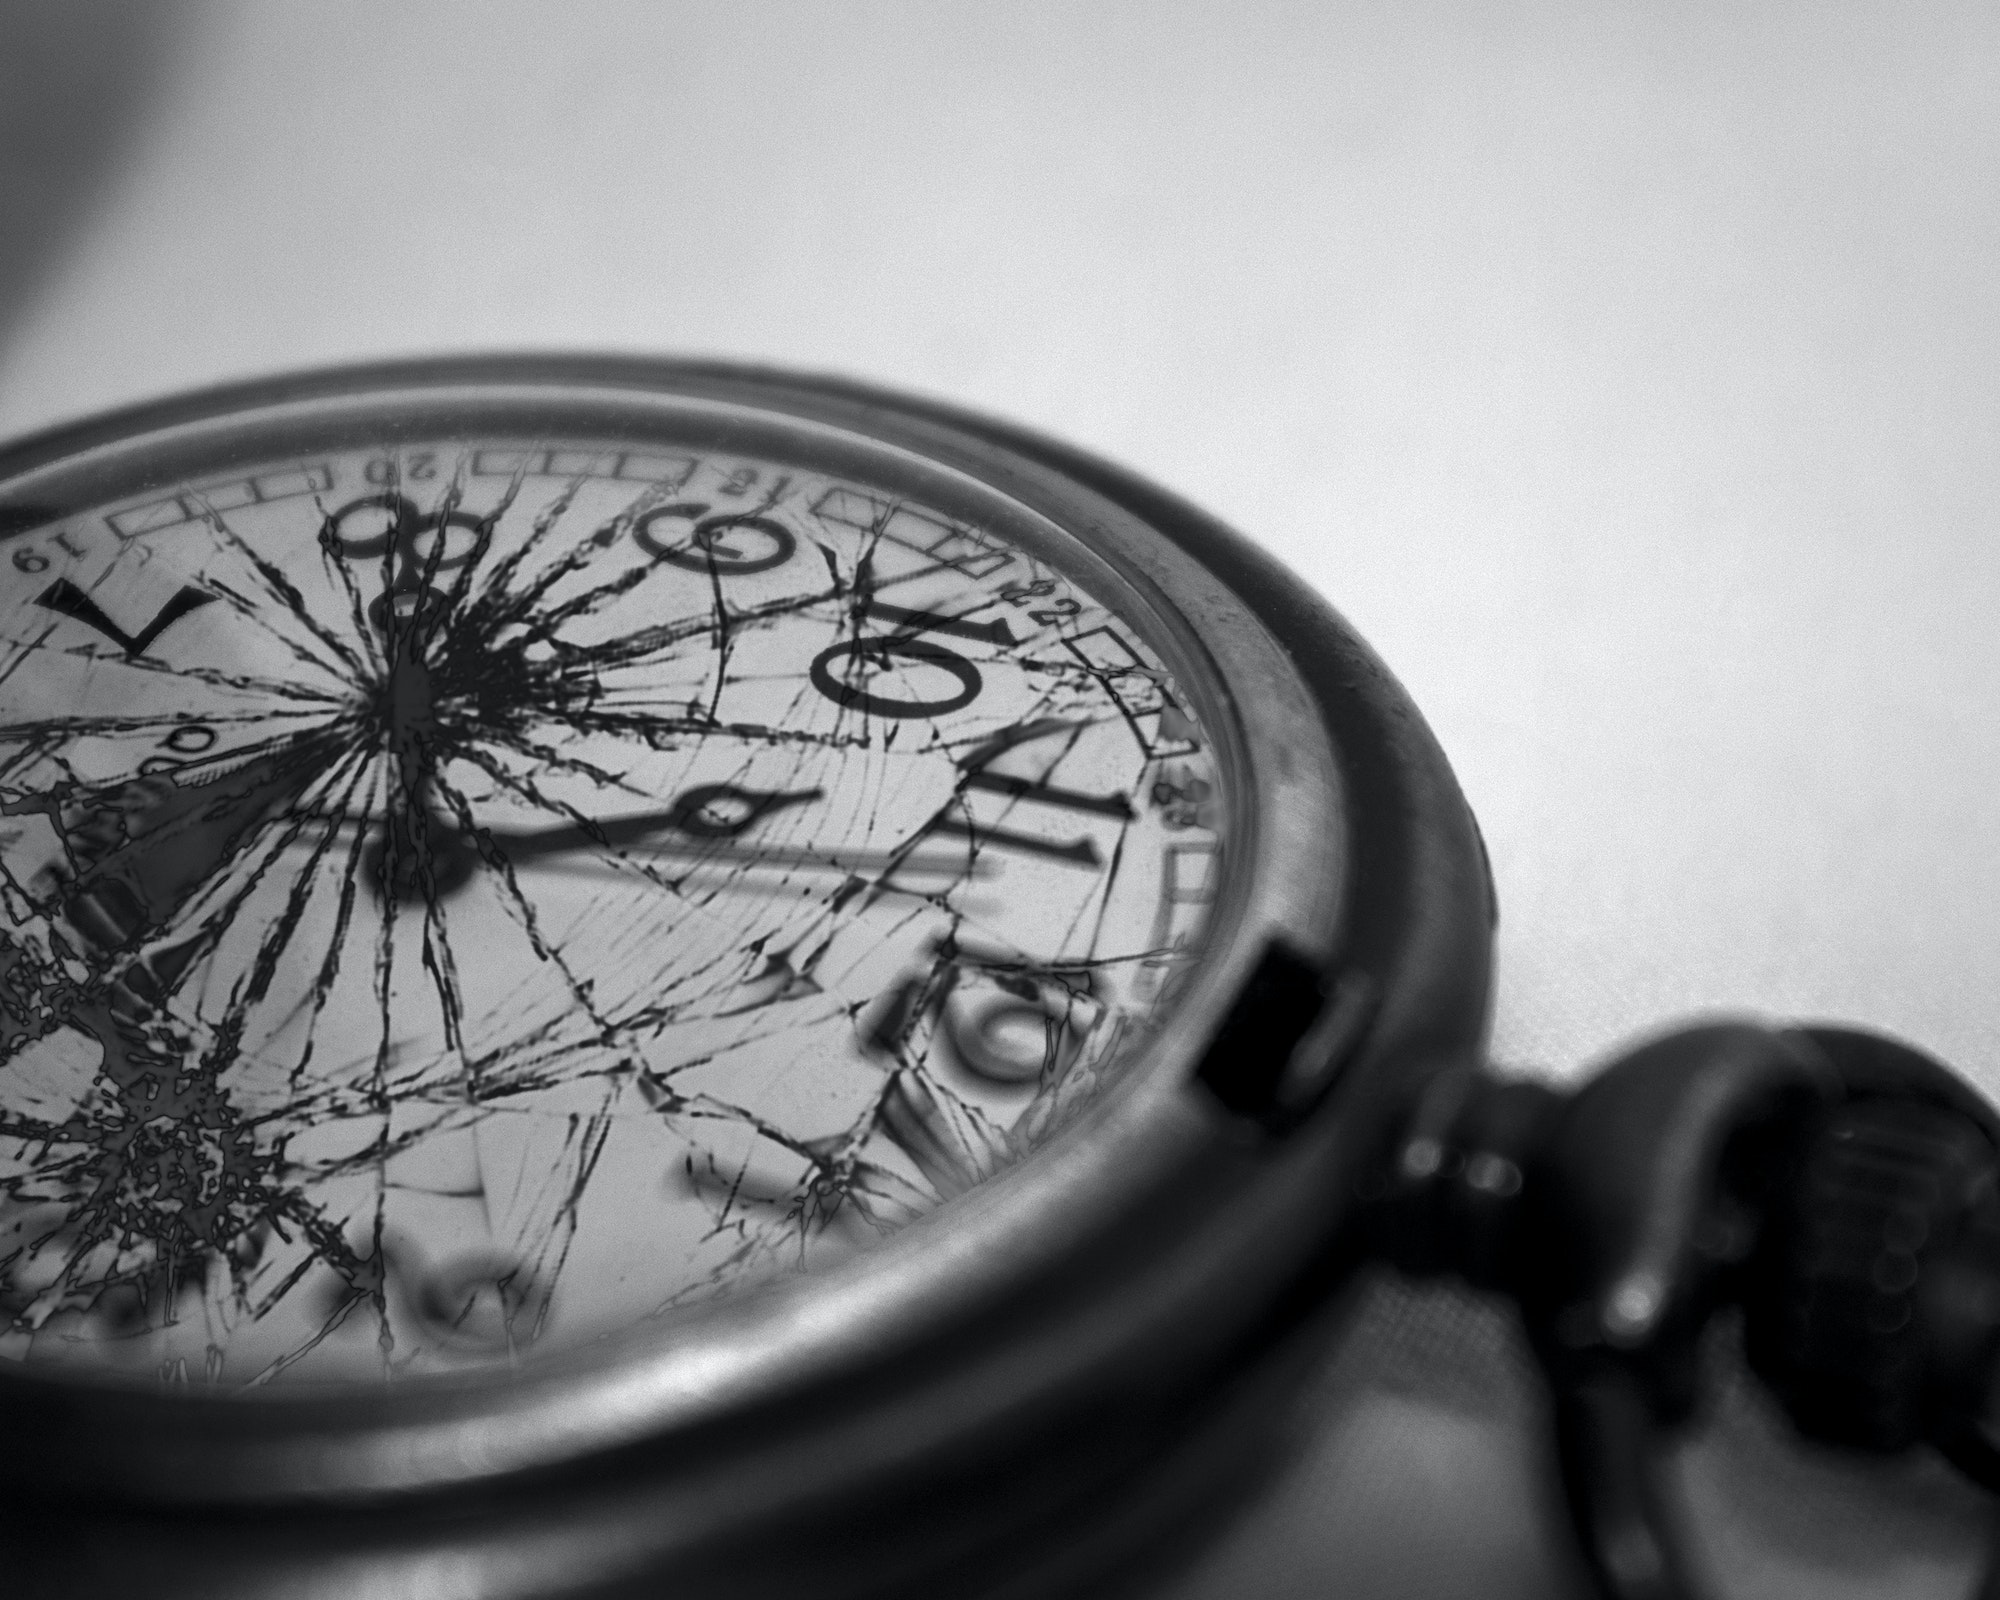 Closeup grayscale shot of an old watch with broken glass on it